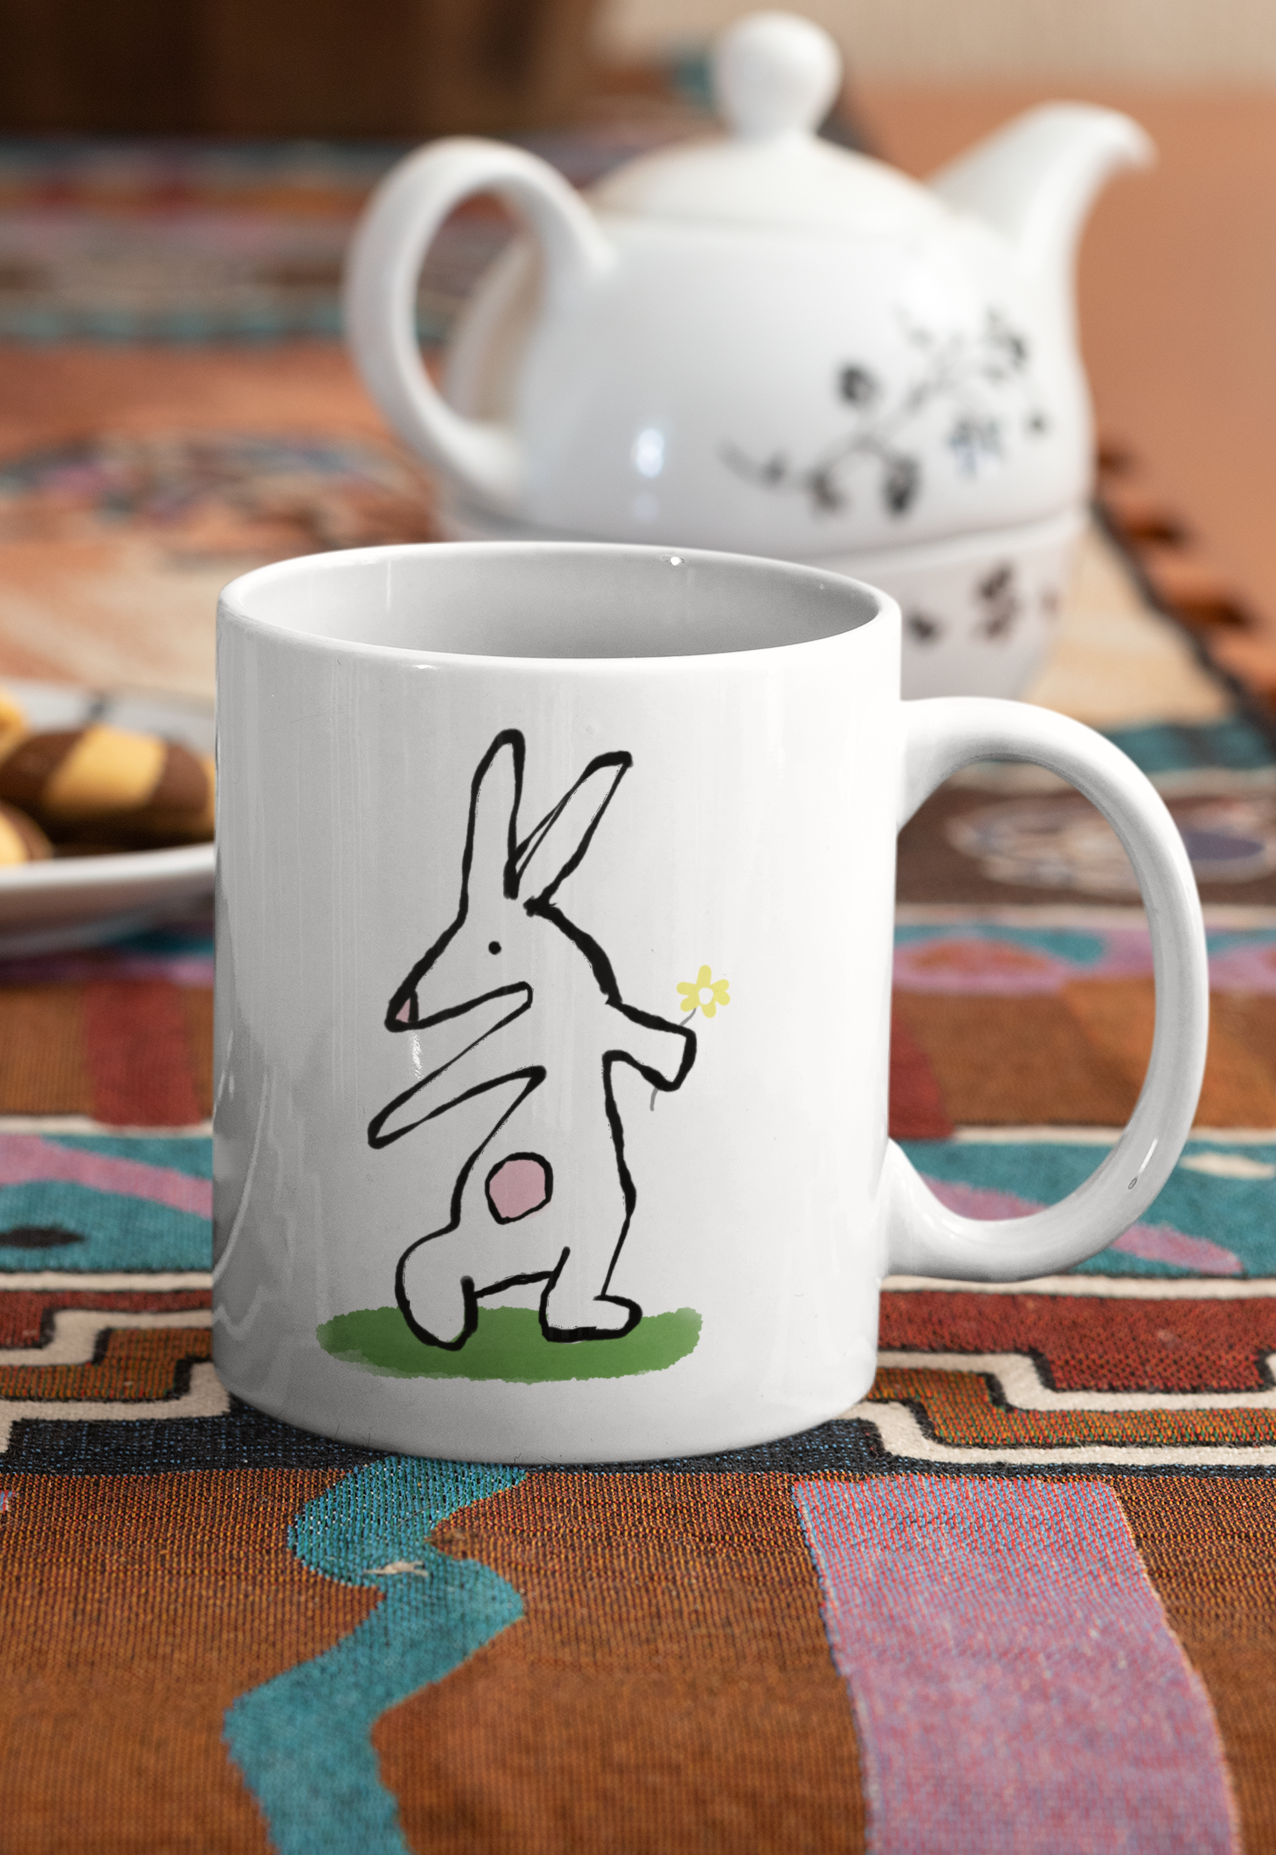 Illustrated Flower Bunny mug Rabbit design on a table - Design by Hector and Bone